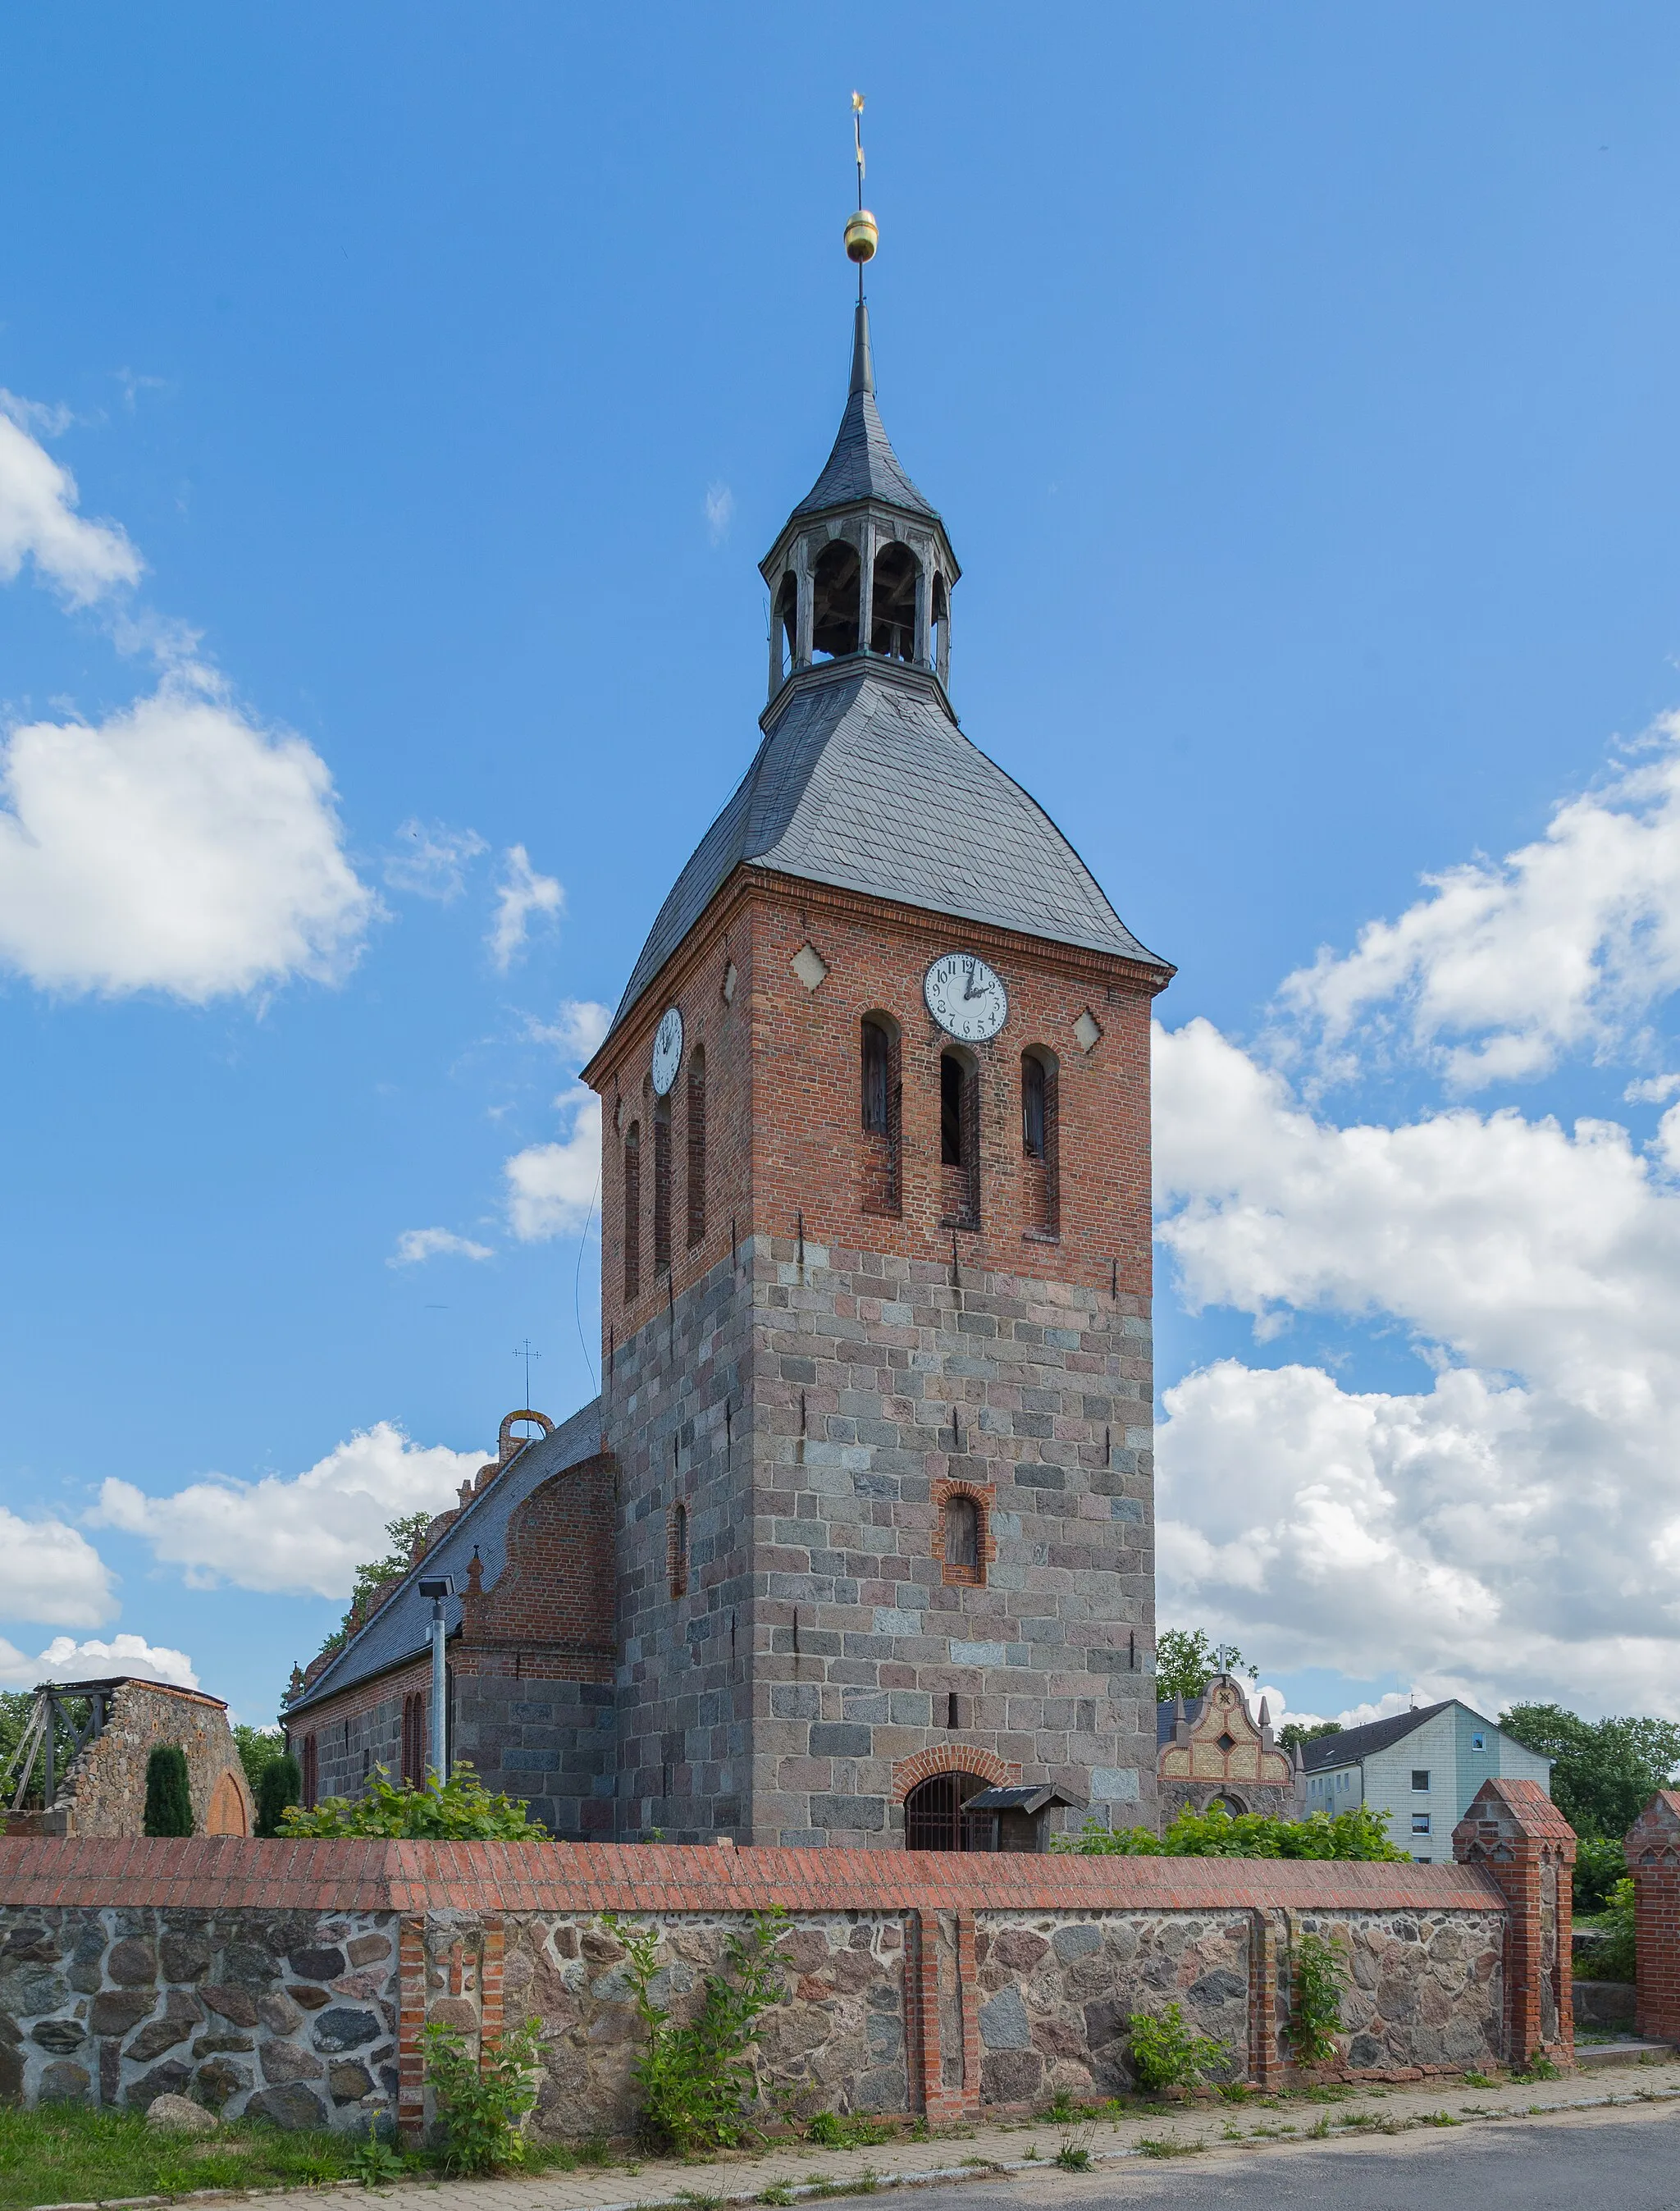 Photo showing: The Protestant village church of Bristow, district of Schorssow, Landkreis Rostock, Mecklenburg-Western Pomerania, Germany. The church is a listed cultural heritage monument.